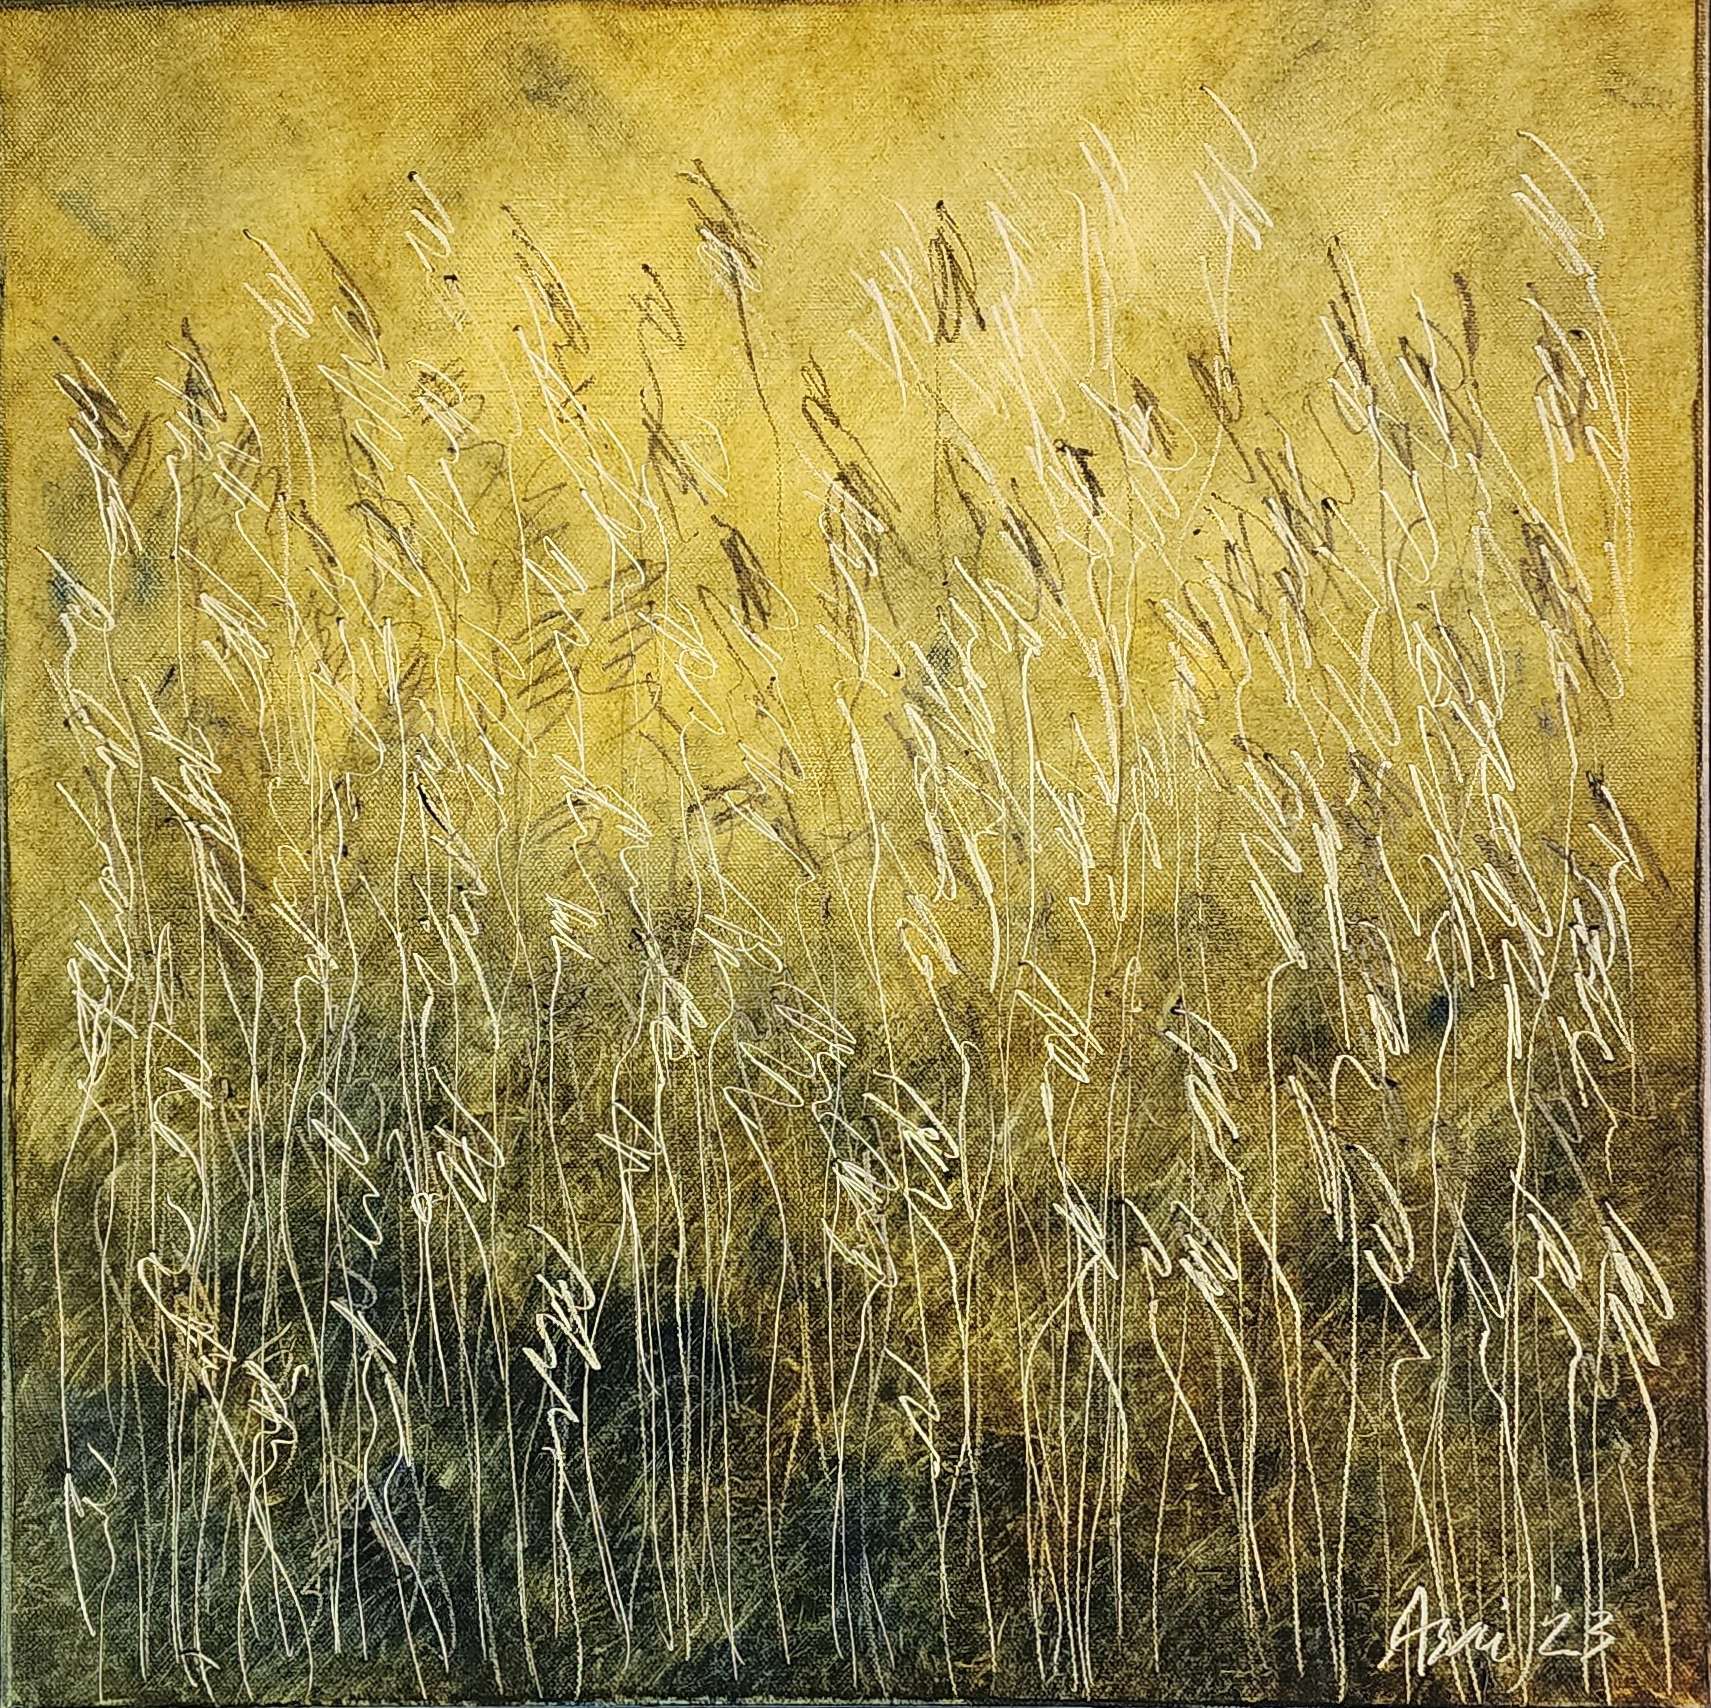 Small Grasses II, oil and graphite on canvas by Pamela Asai